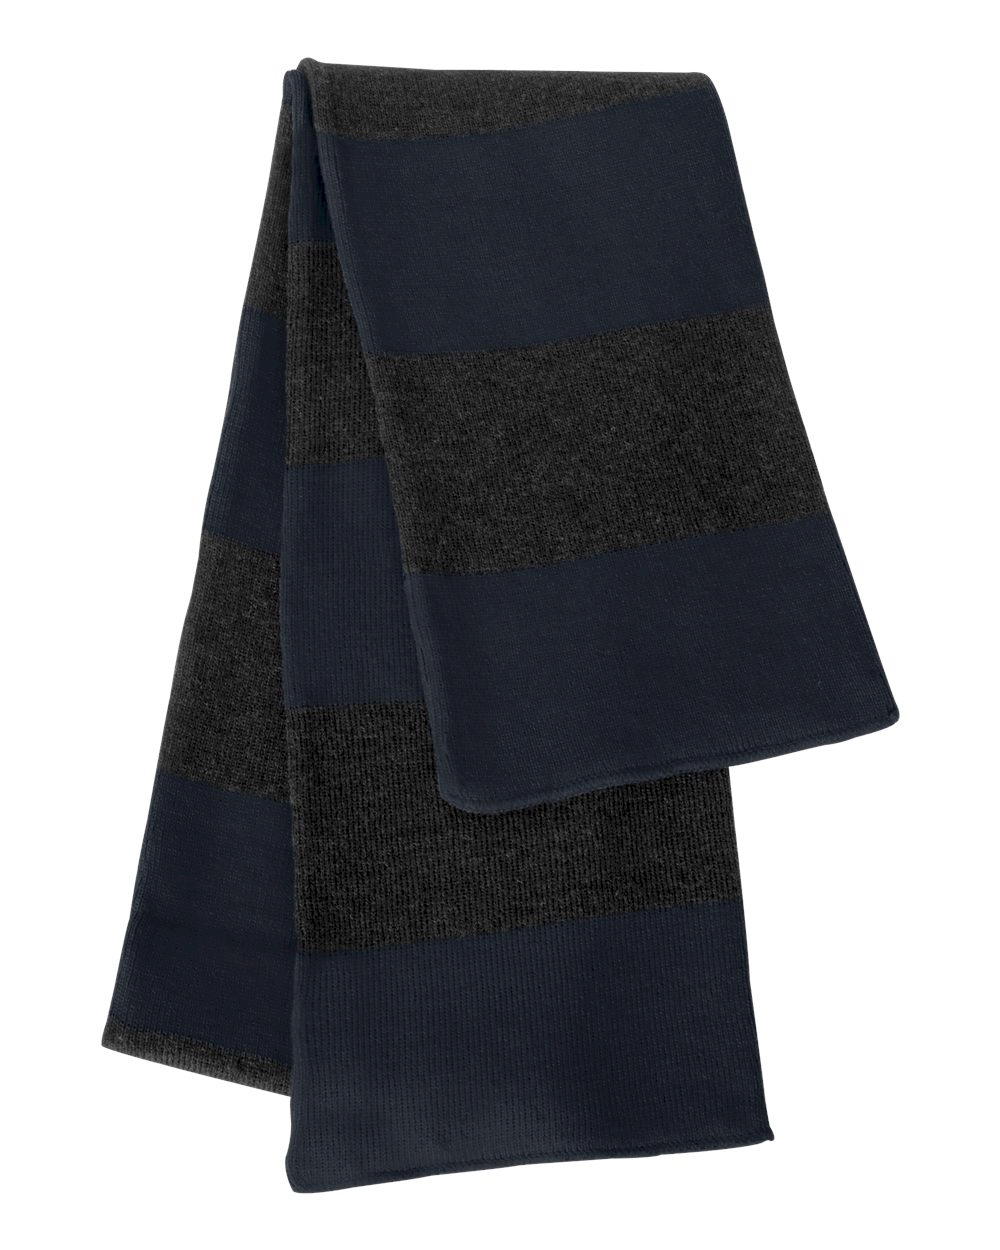 Rugby Striped Knit Scarf Embroidery Blanks - NAVY/CHARCOAL